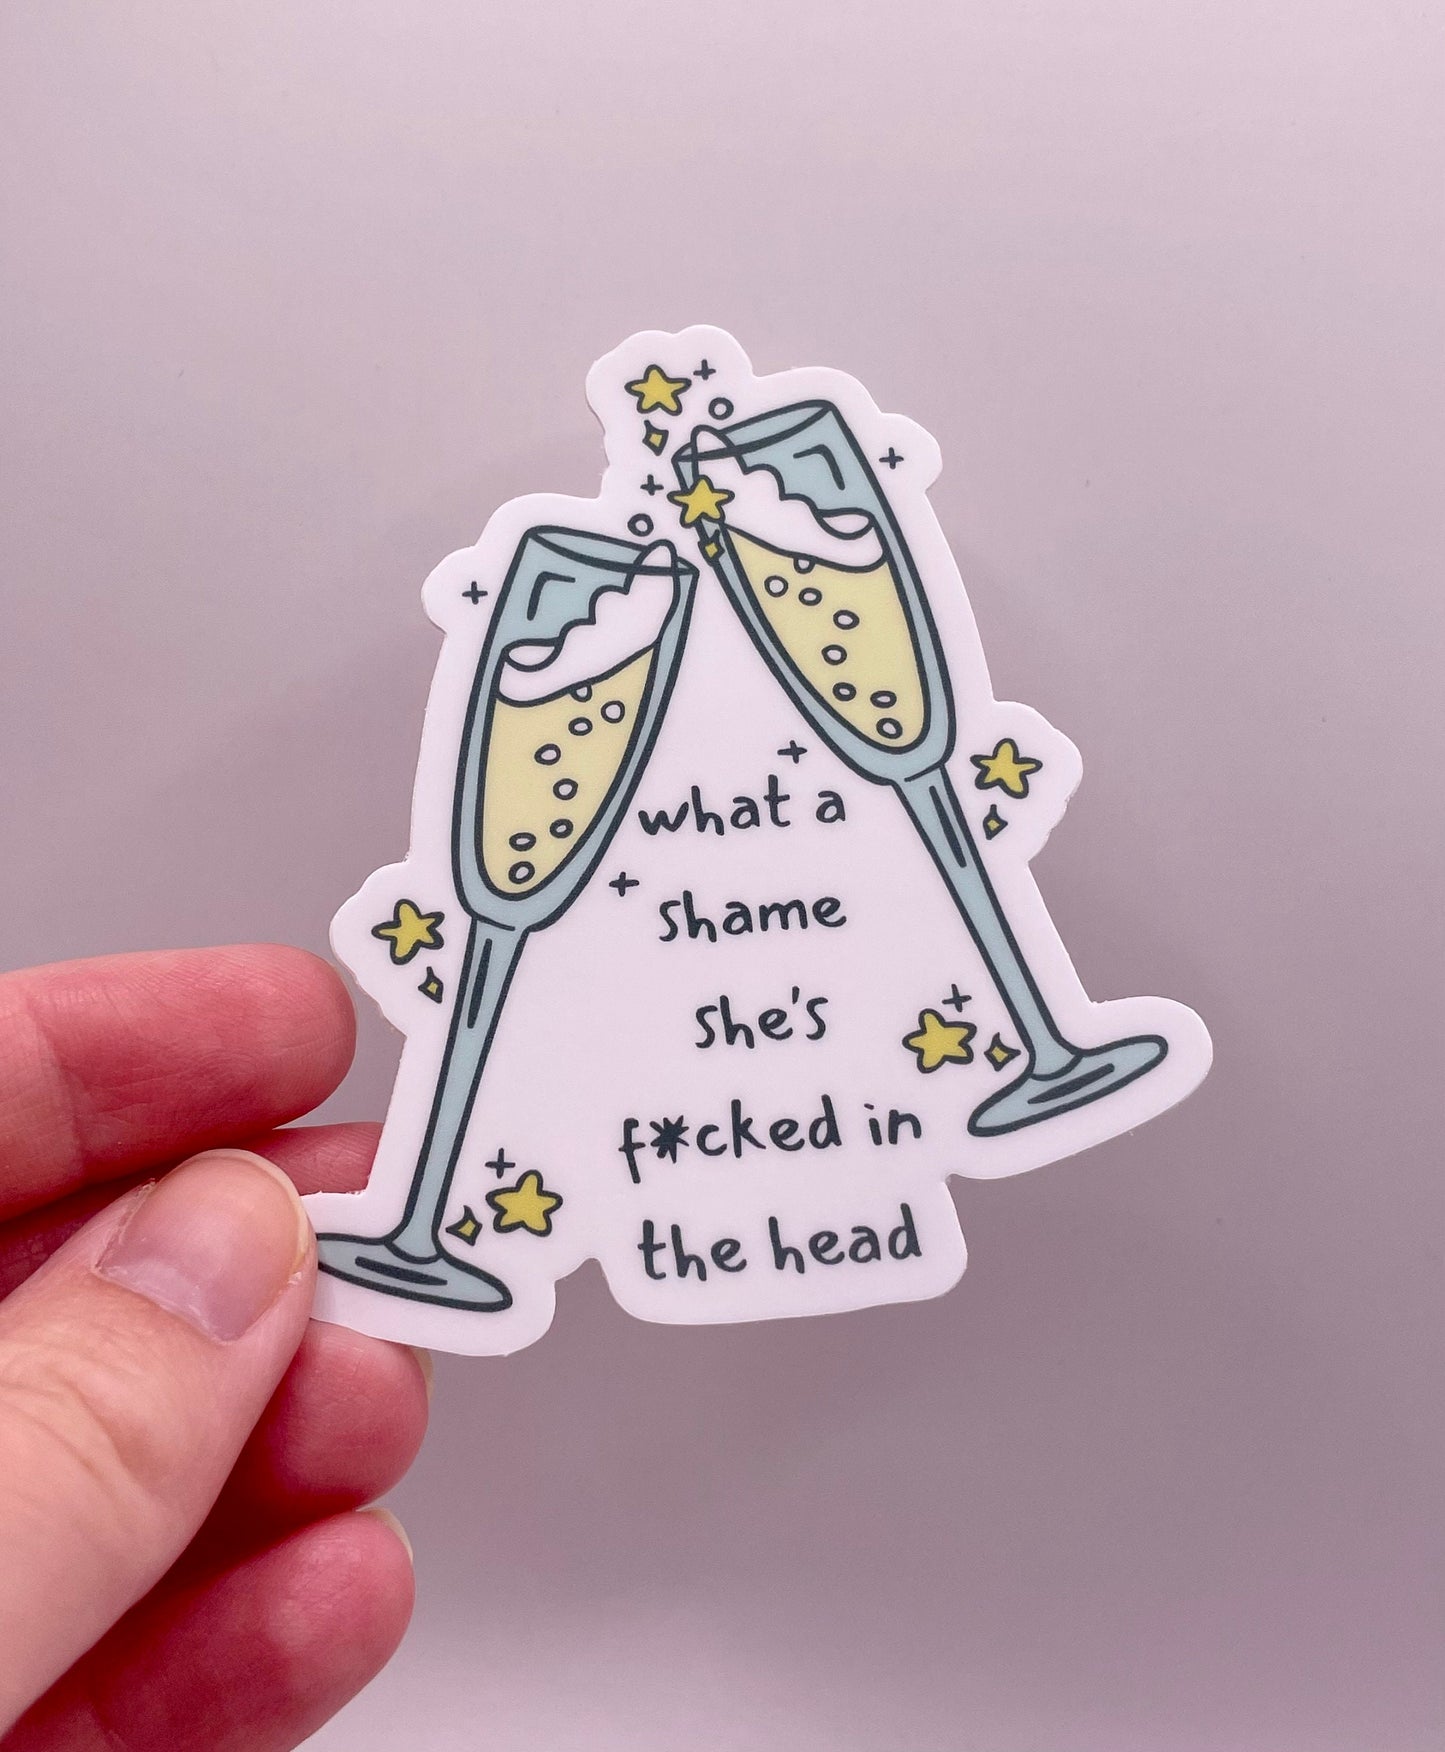 Champagne Problems Sticker | Taylor Swift Stickers